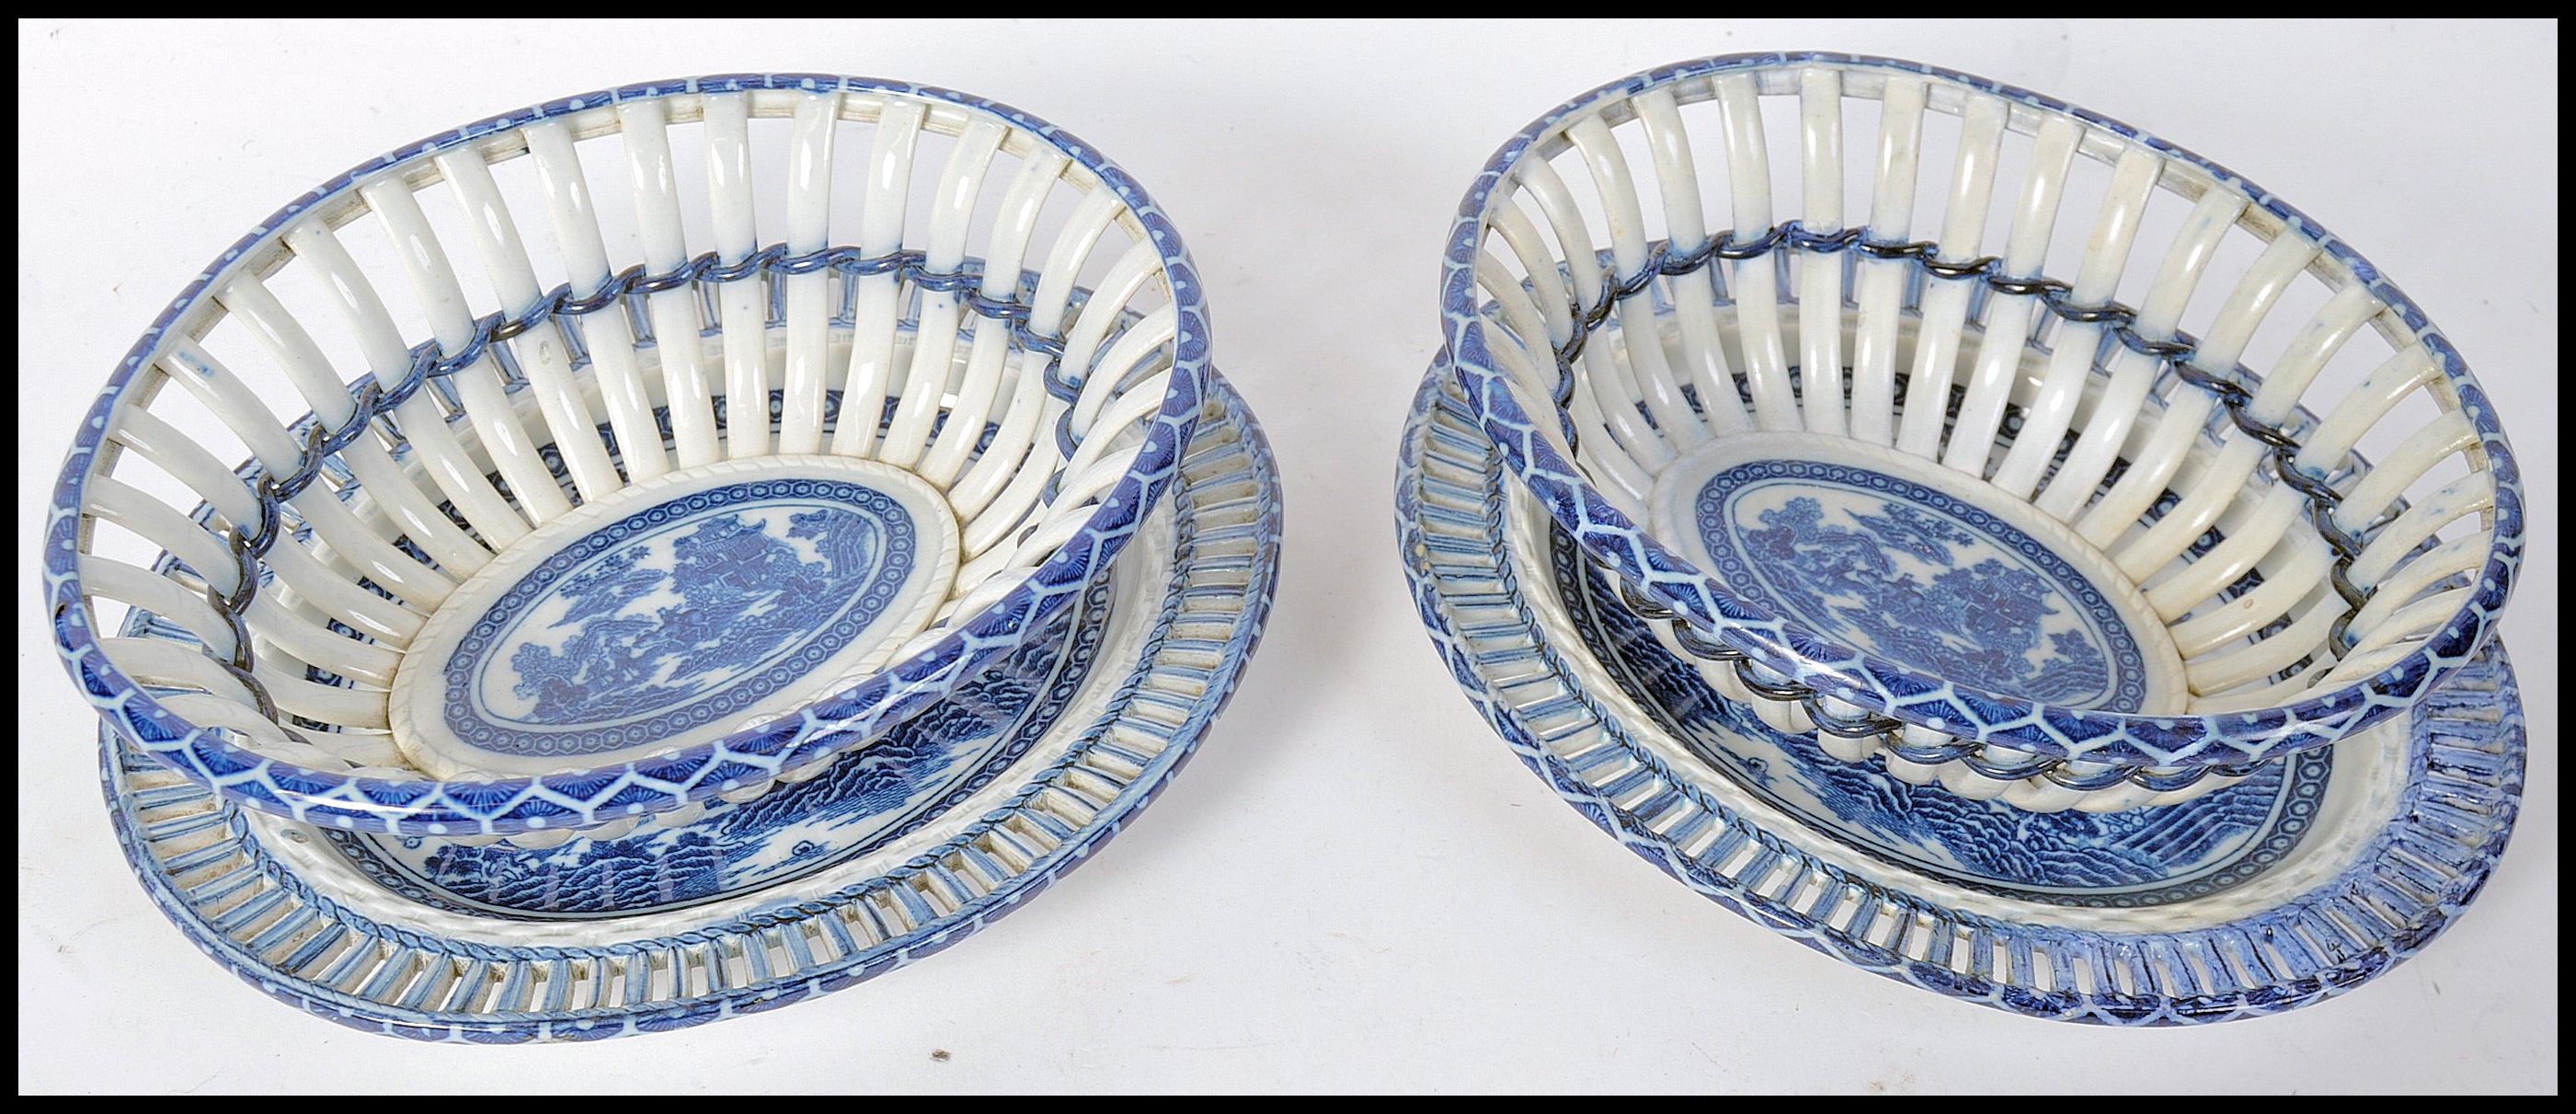 18TH CENTURY CAUGHLEY PORCELAIN BLUE & WHITE CHESTNUT BASKET AND STANDS